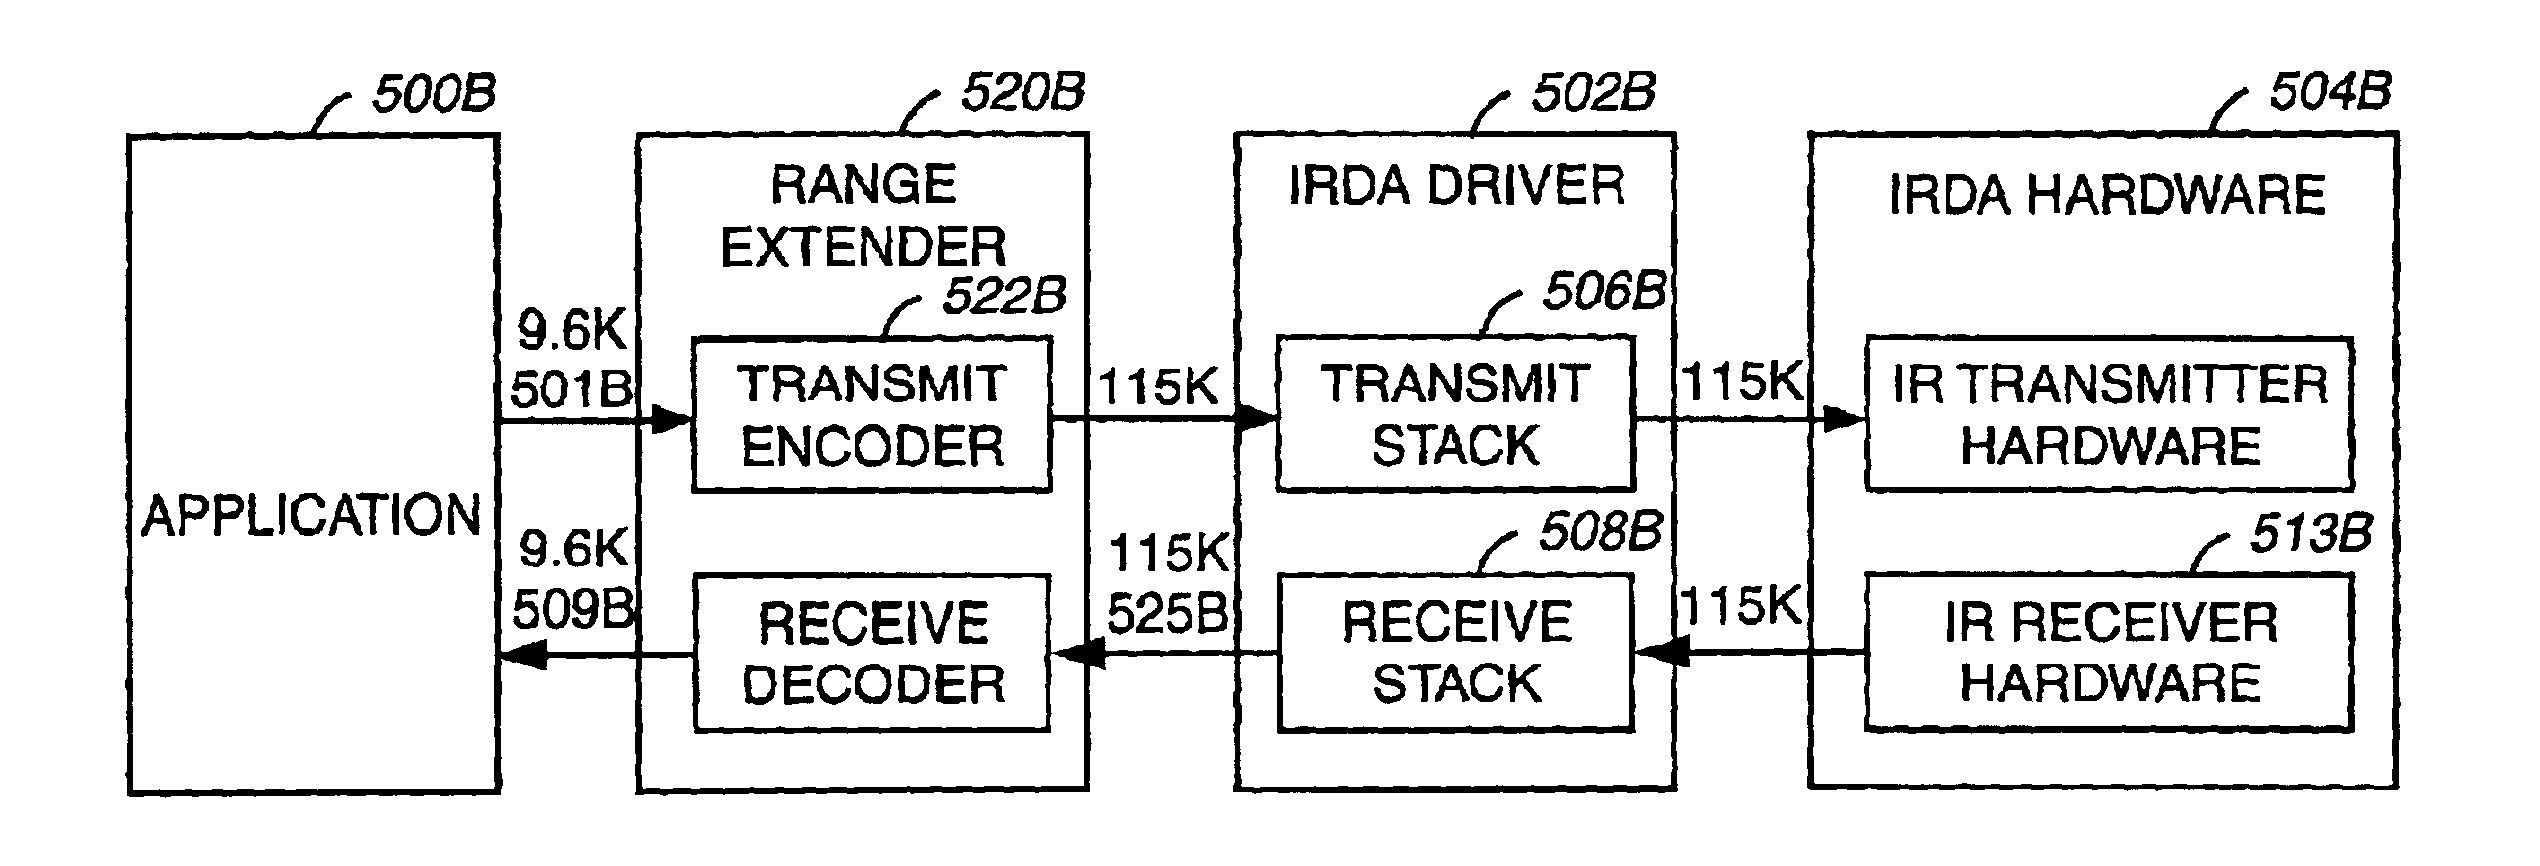 System and method for remote optical digital networking of computing devices